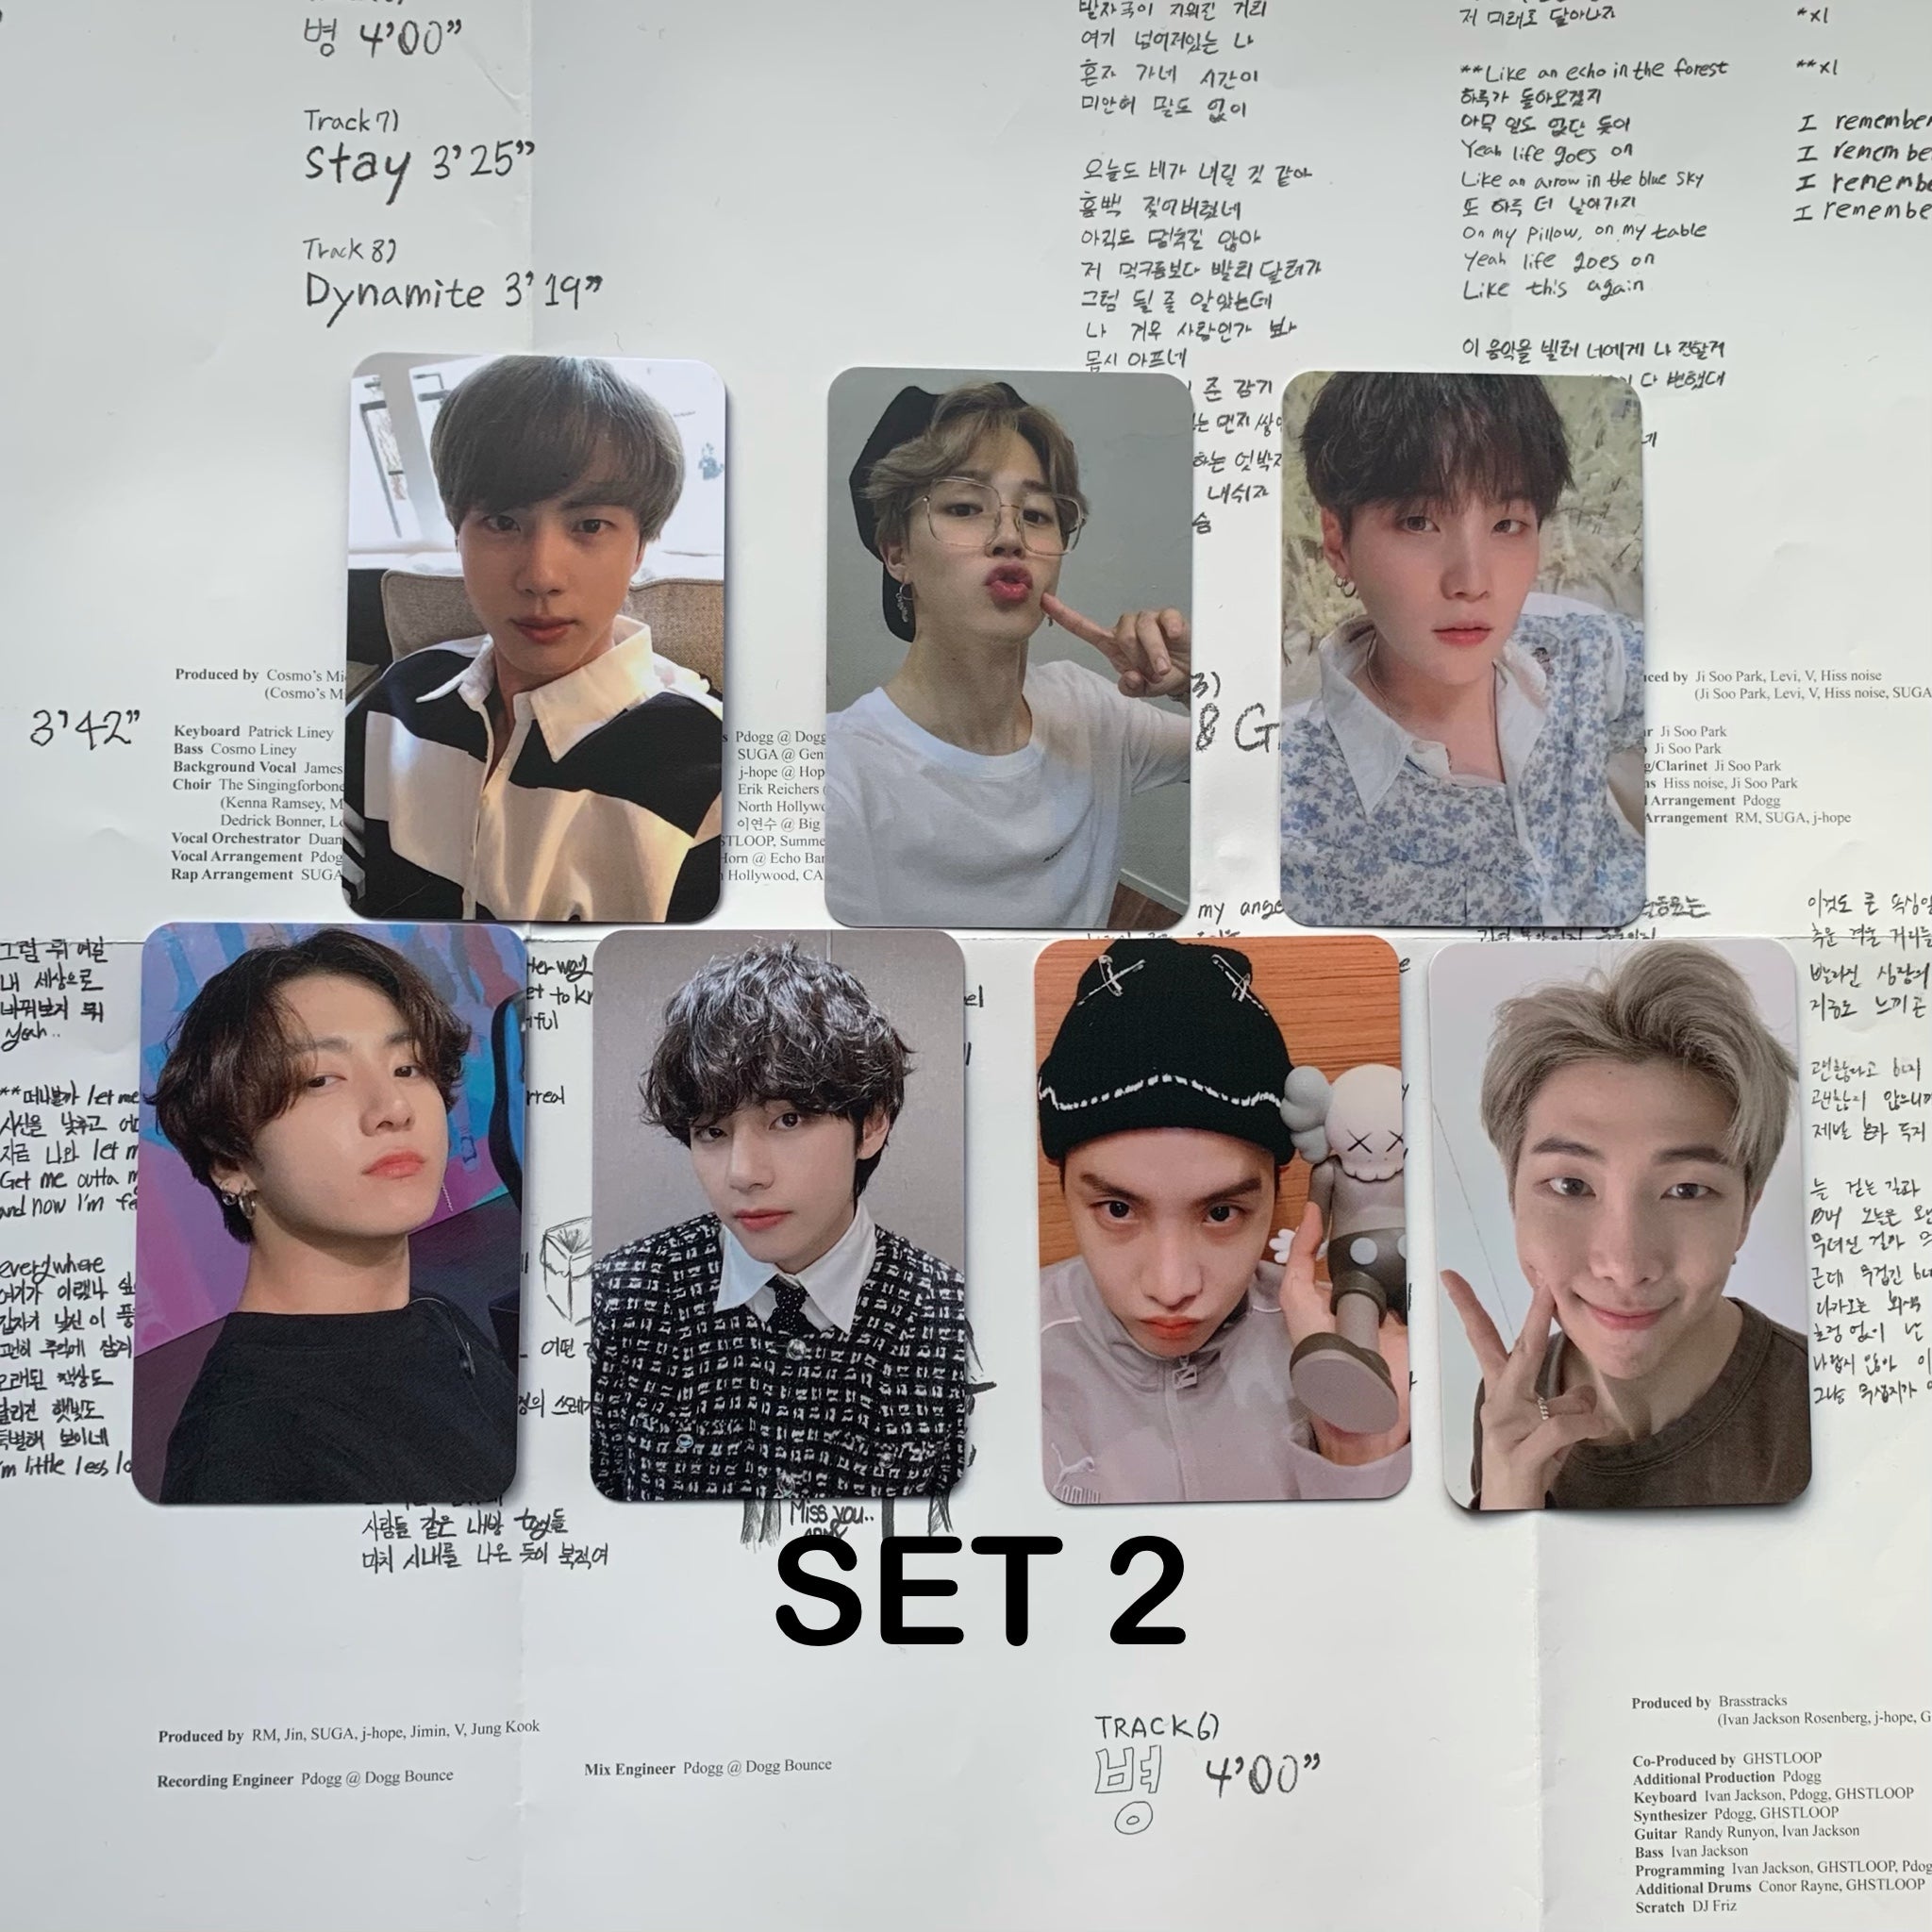 BTS Photocards Pack Of 16 (14 Individual & 2 Group)